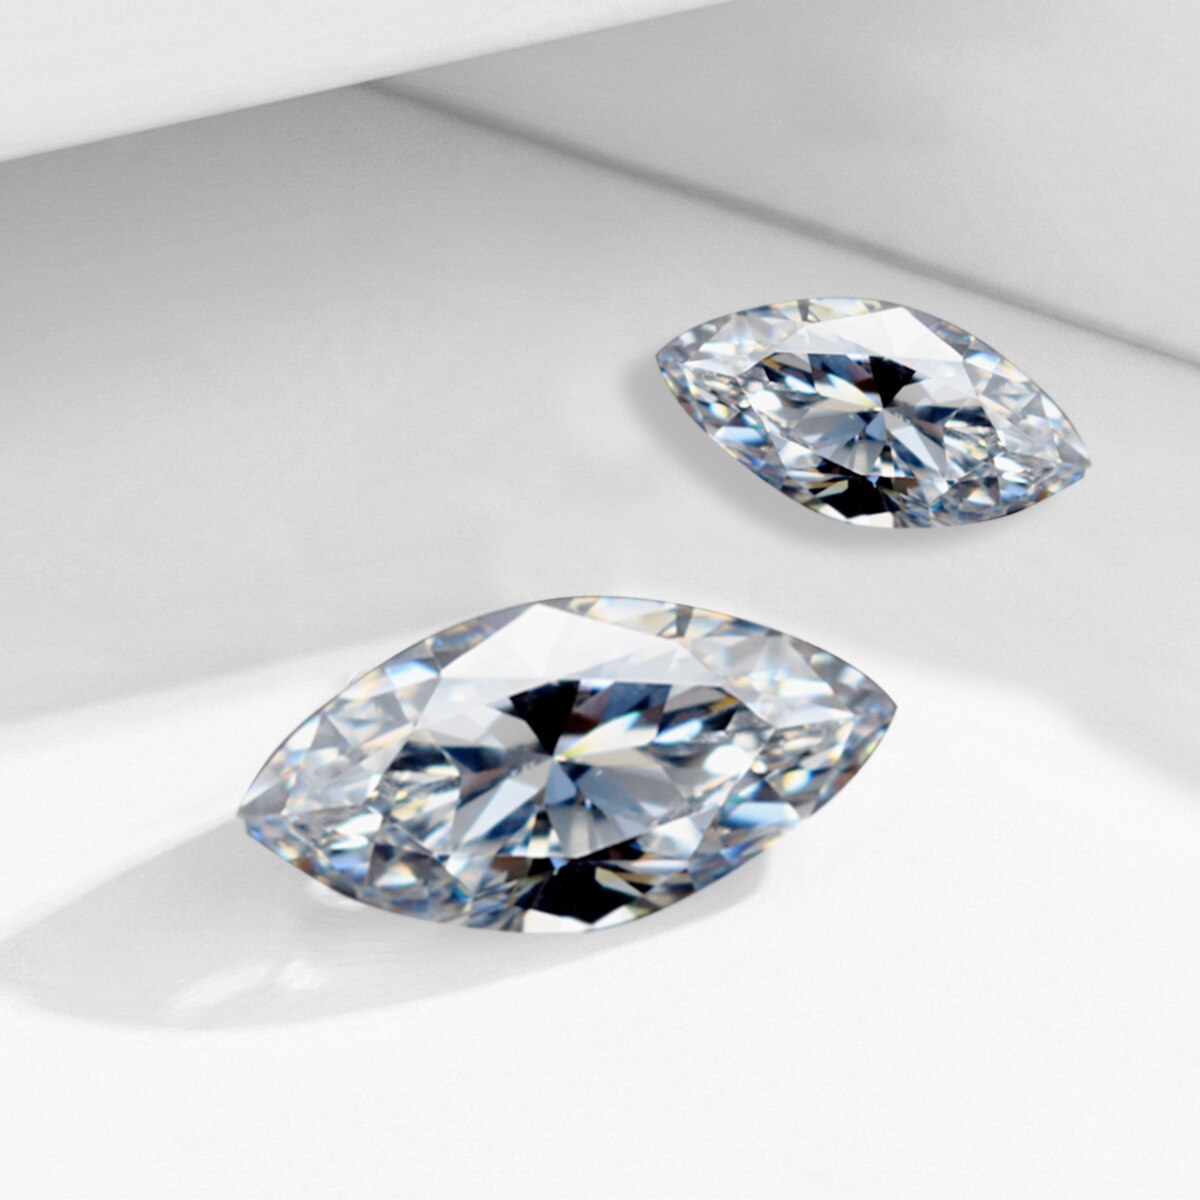 Marquise Cut. Moissanite Gemstones From 0.20 to 3.0 Carats. D VVS1.